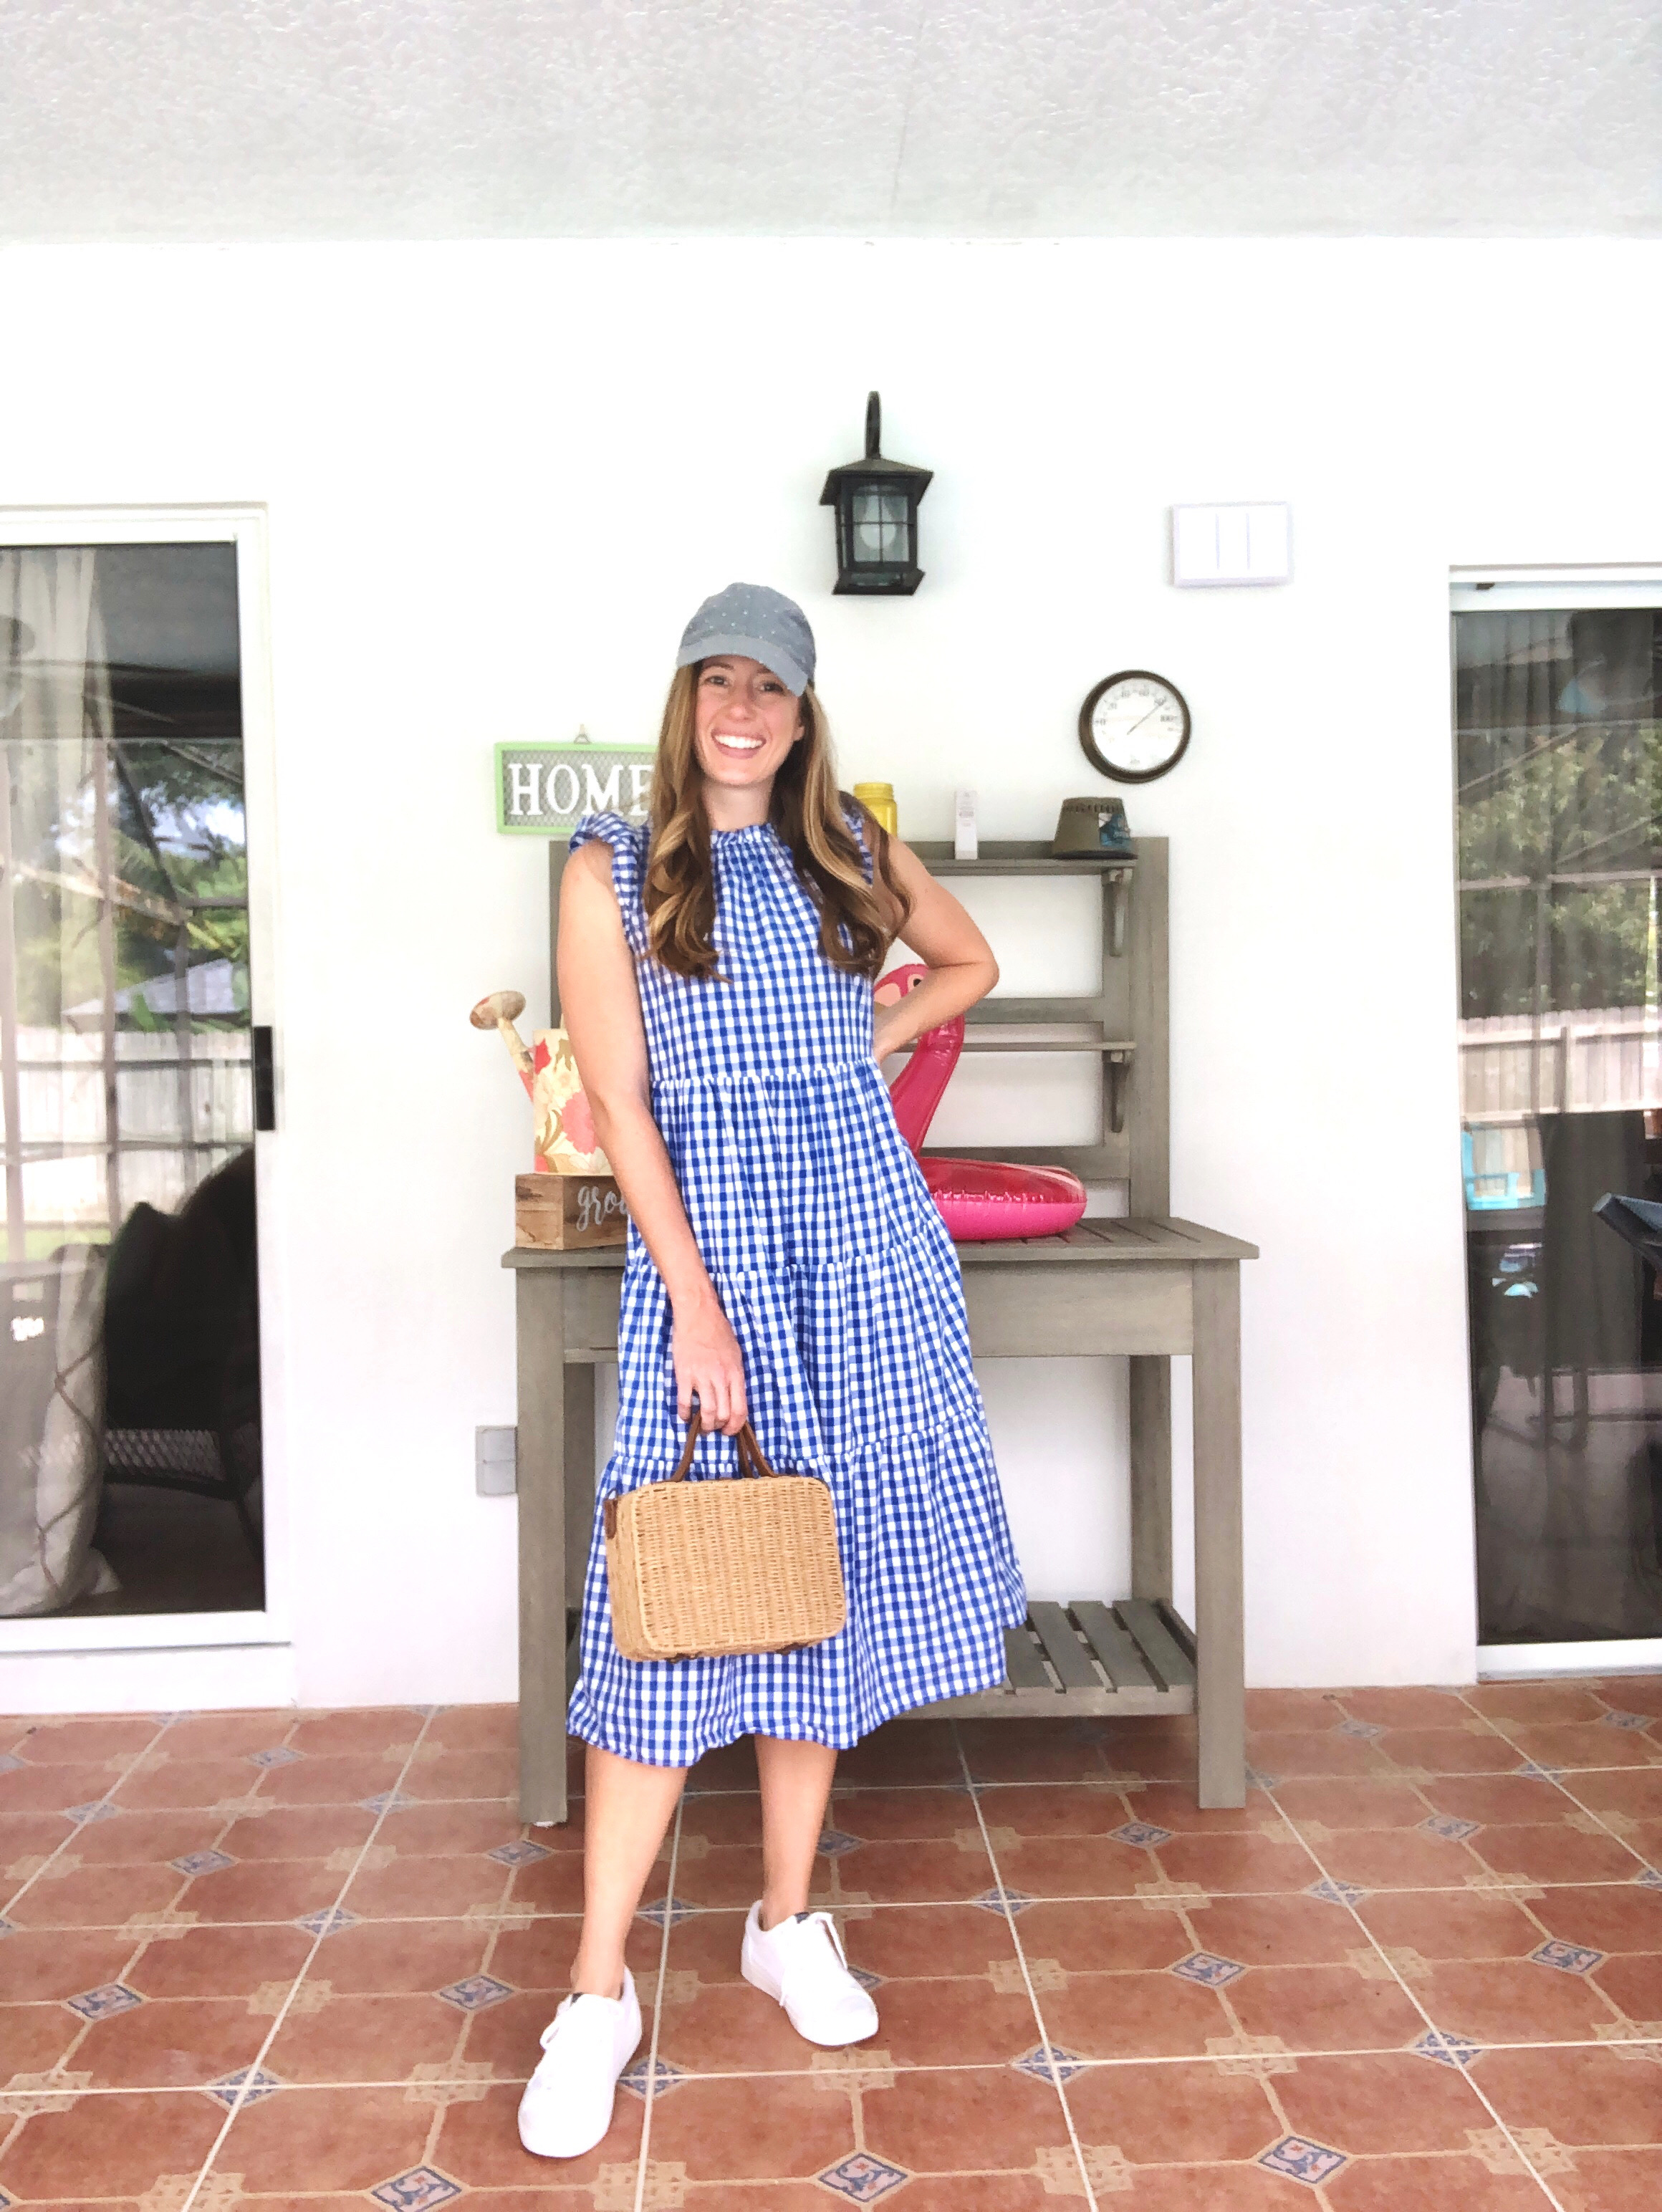 Blue Gingham Babydoll A-line Dress with White Sneakers and a baseball cap